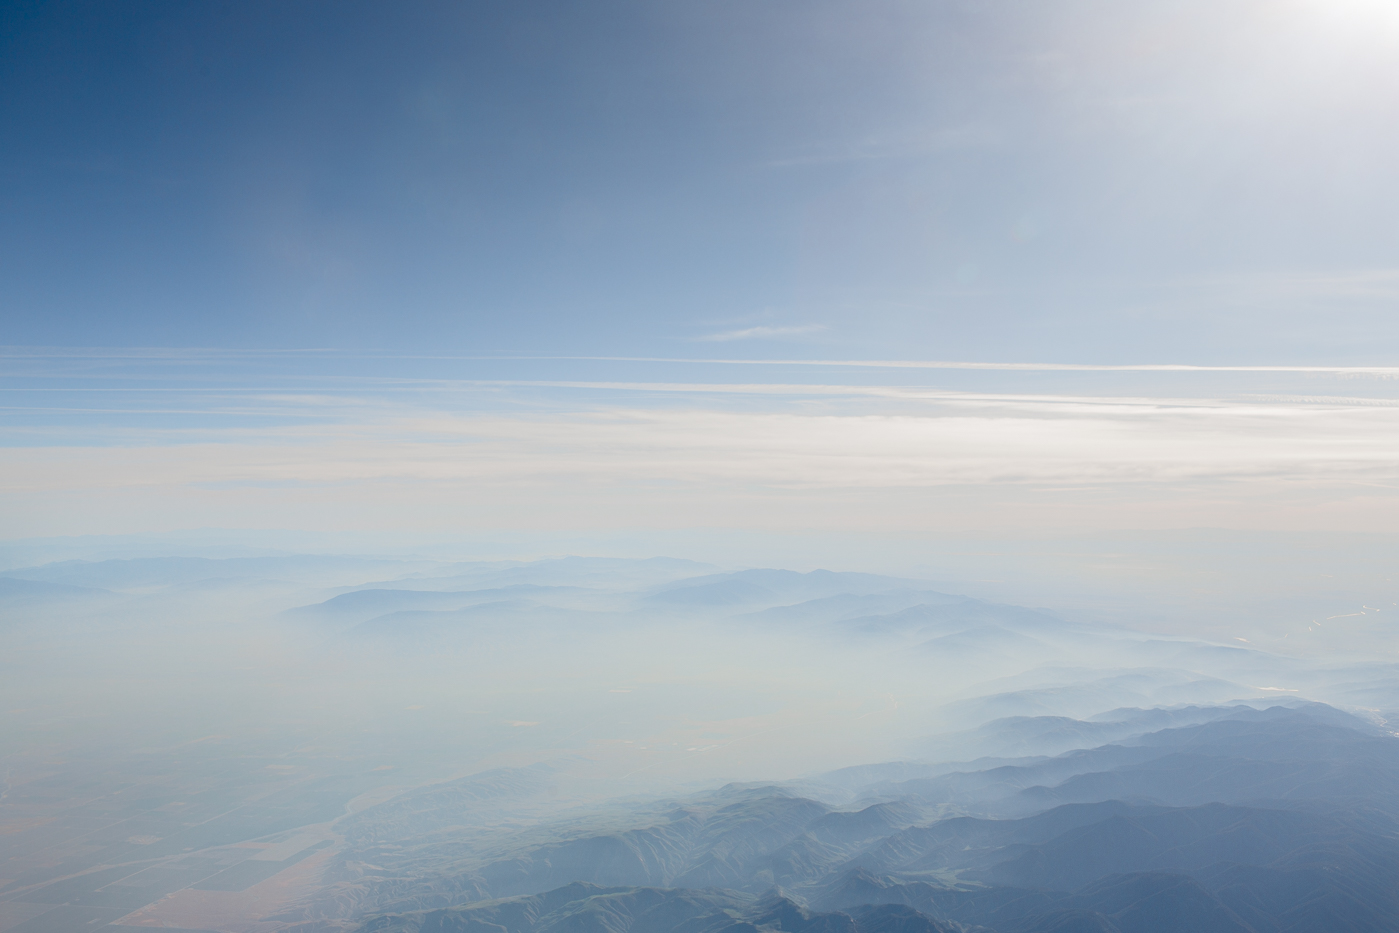 California from above. An aerial view from 36k feet.